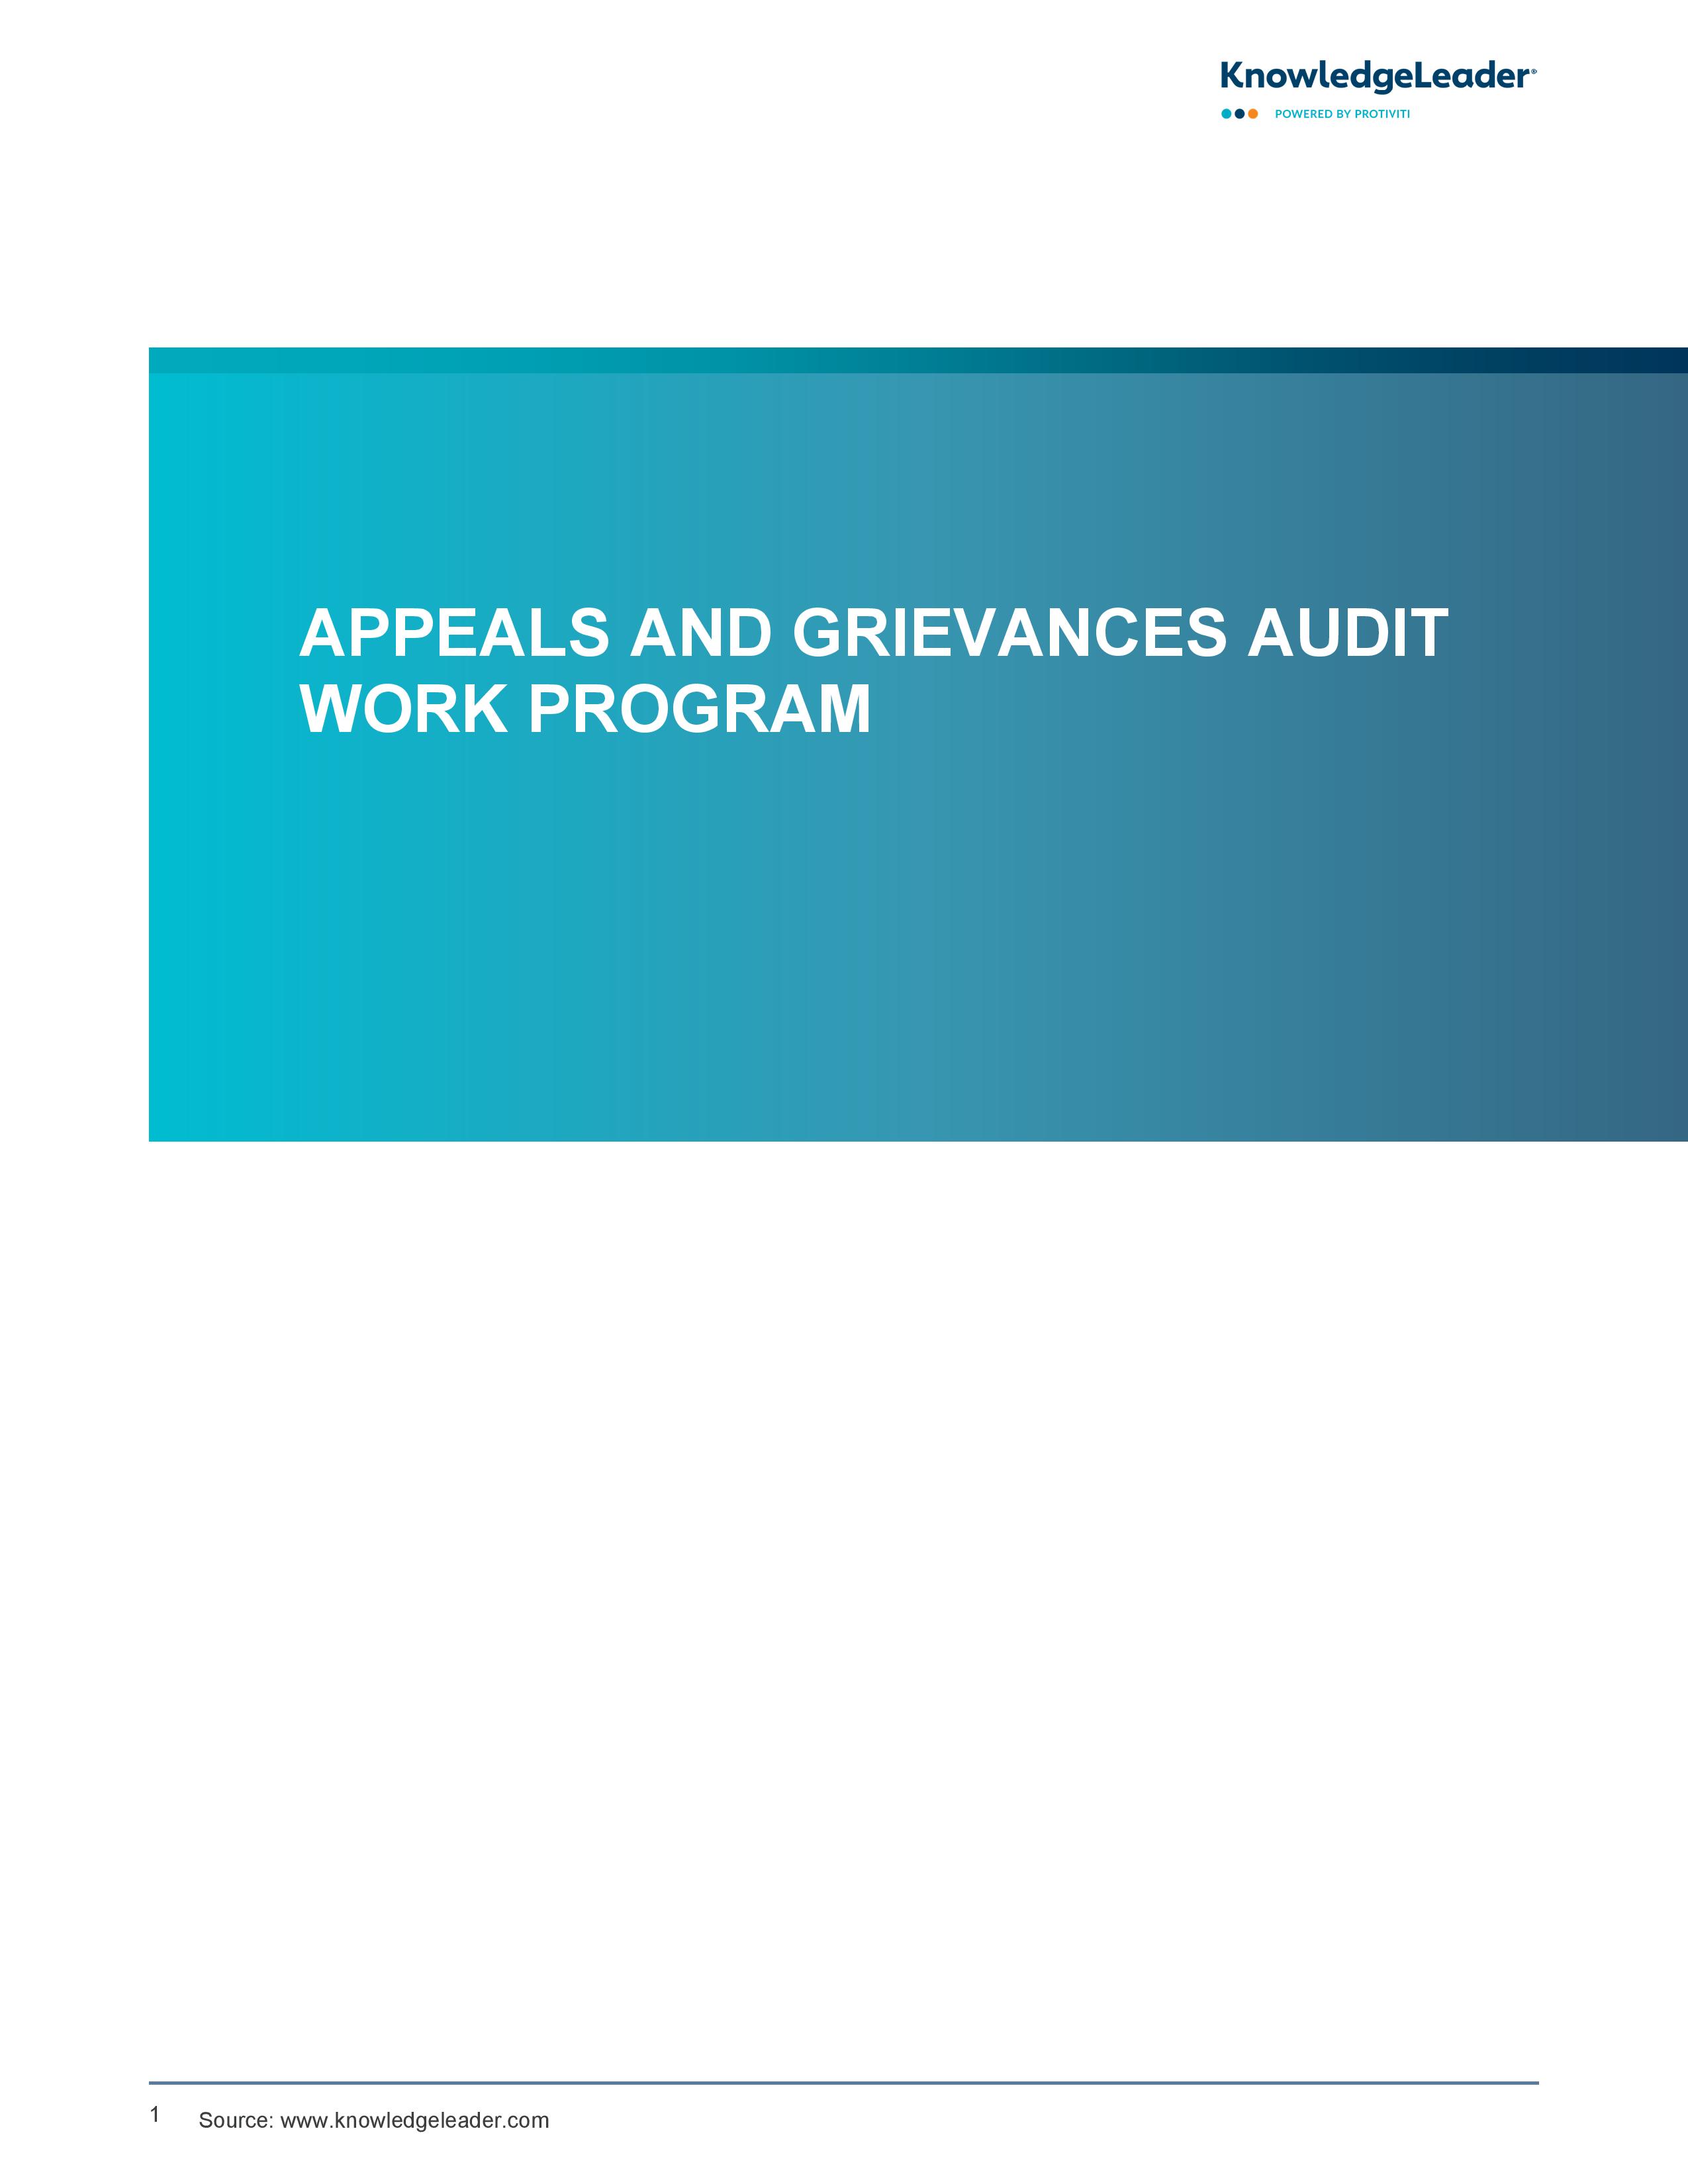 Screenshot of the first page of Appeals and Grievances Audit Work Program